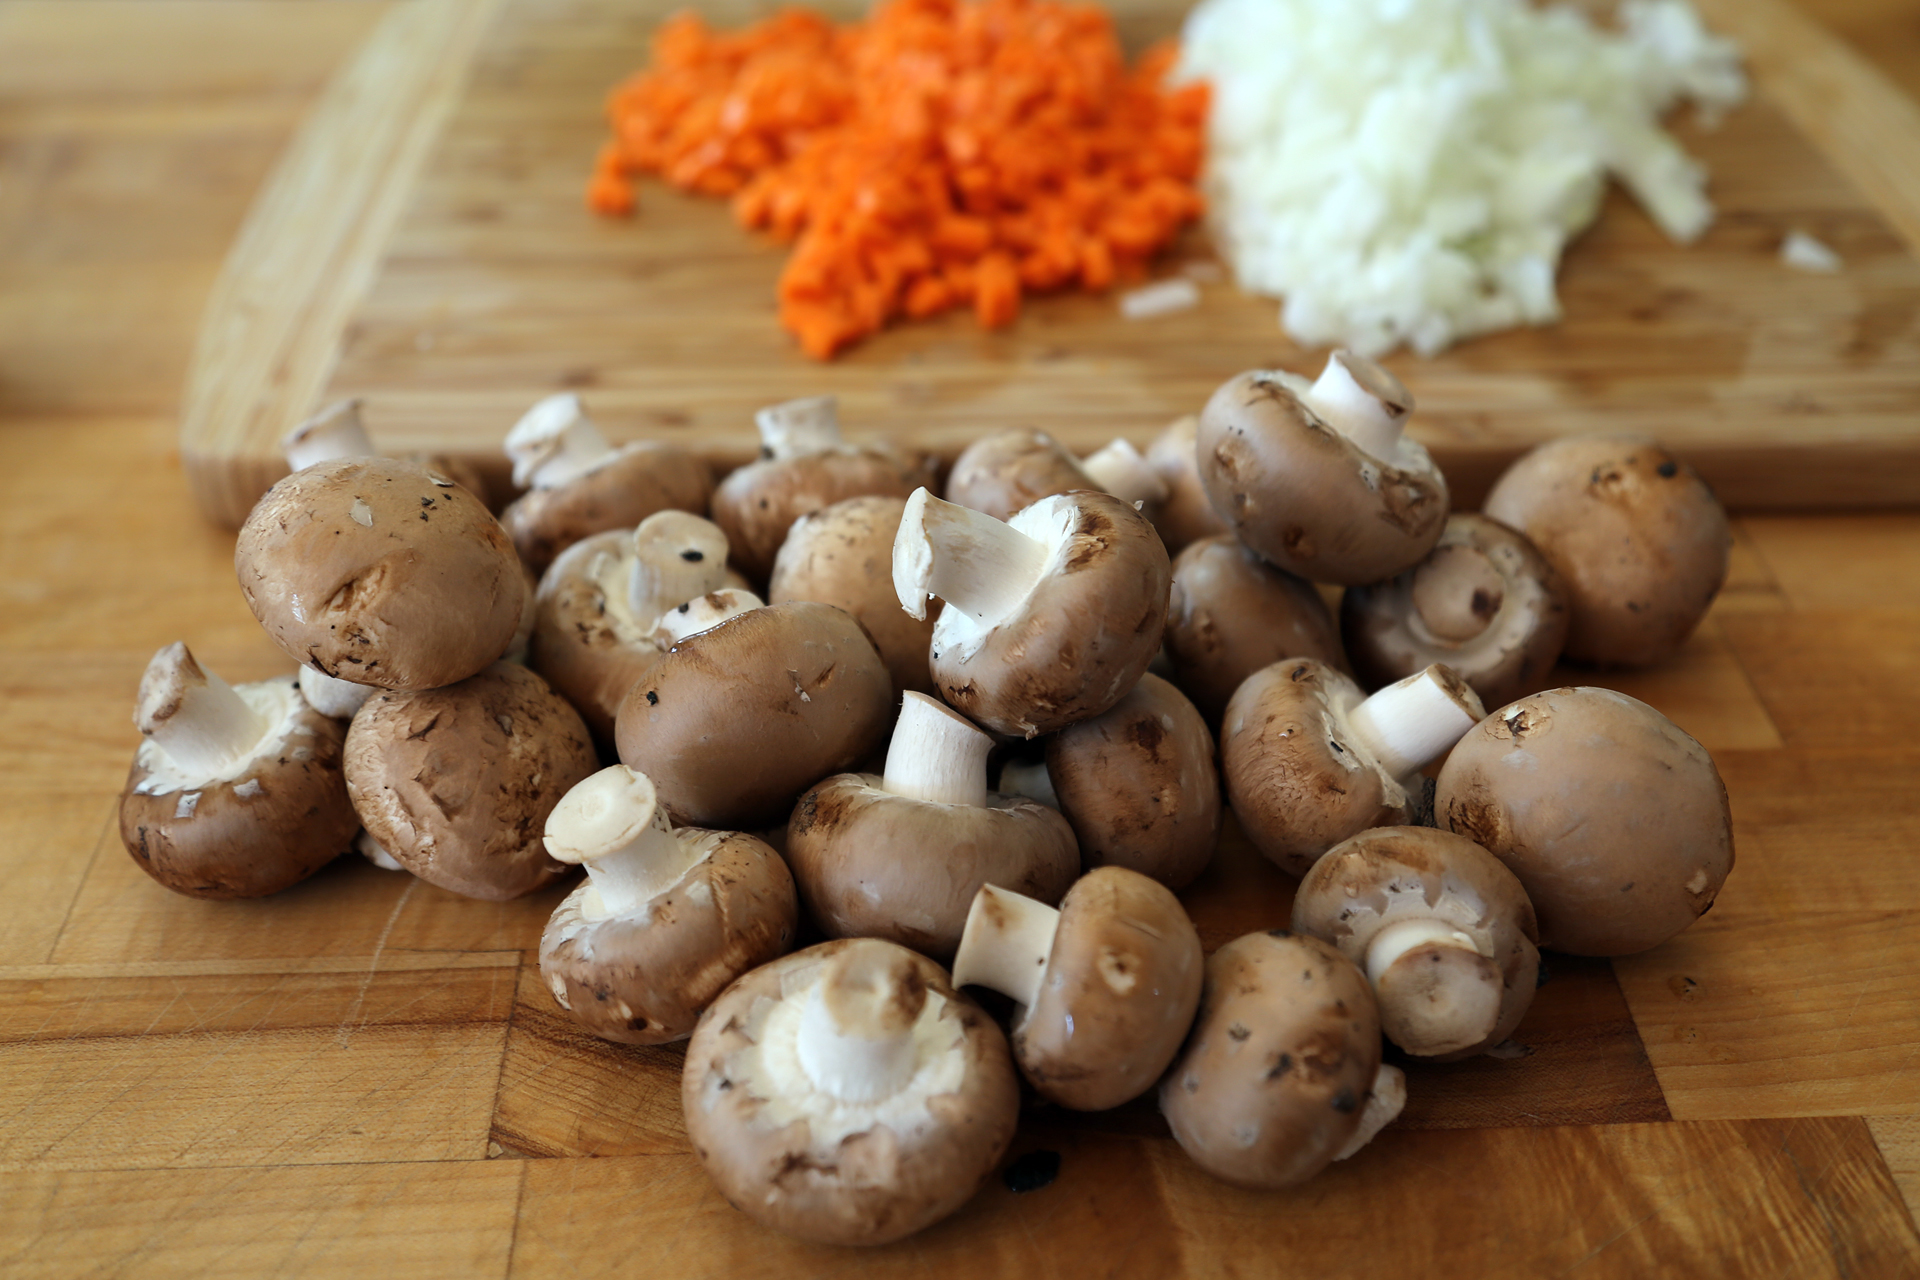 Mushroom and prepped carrots and onions